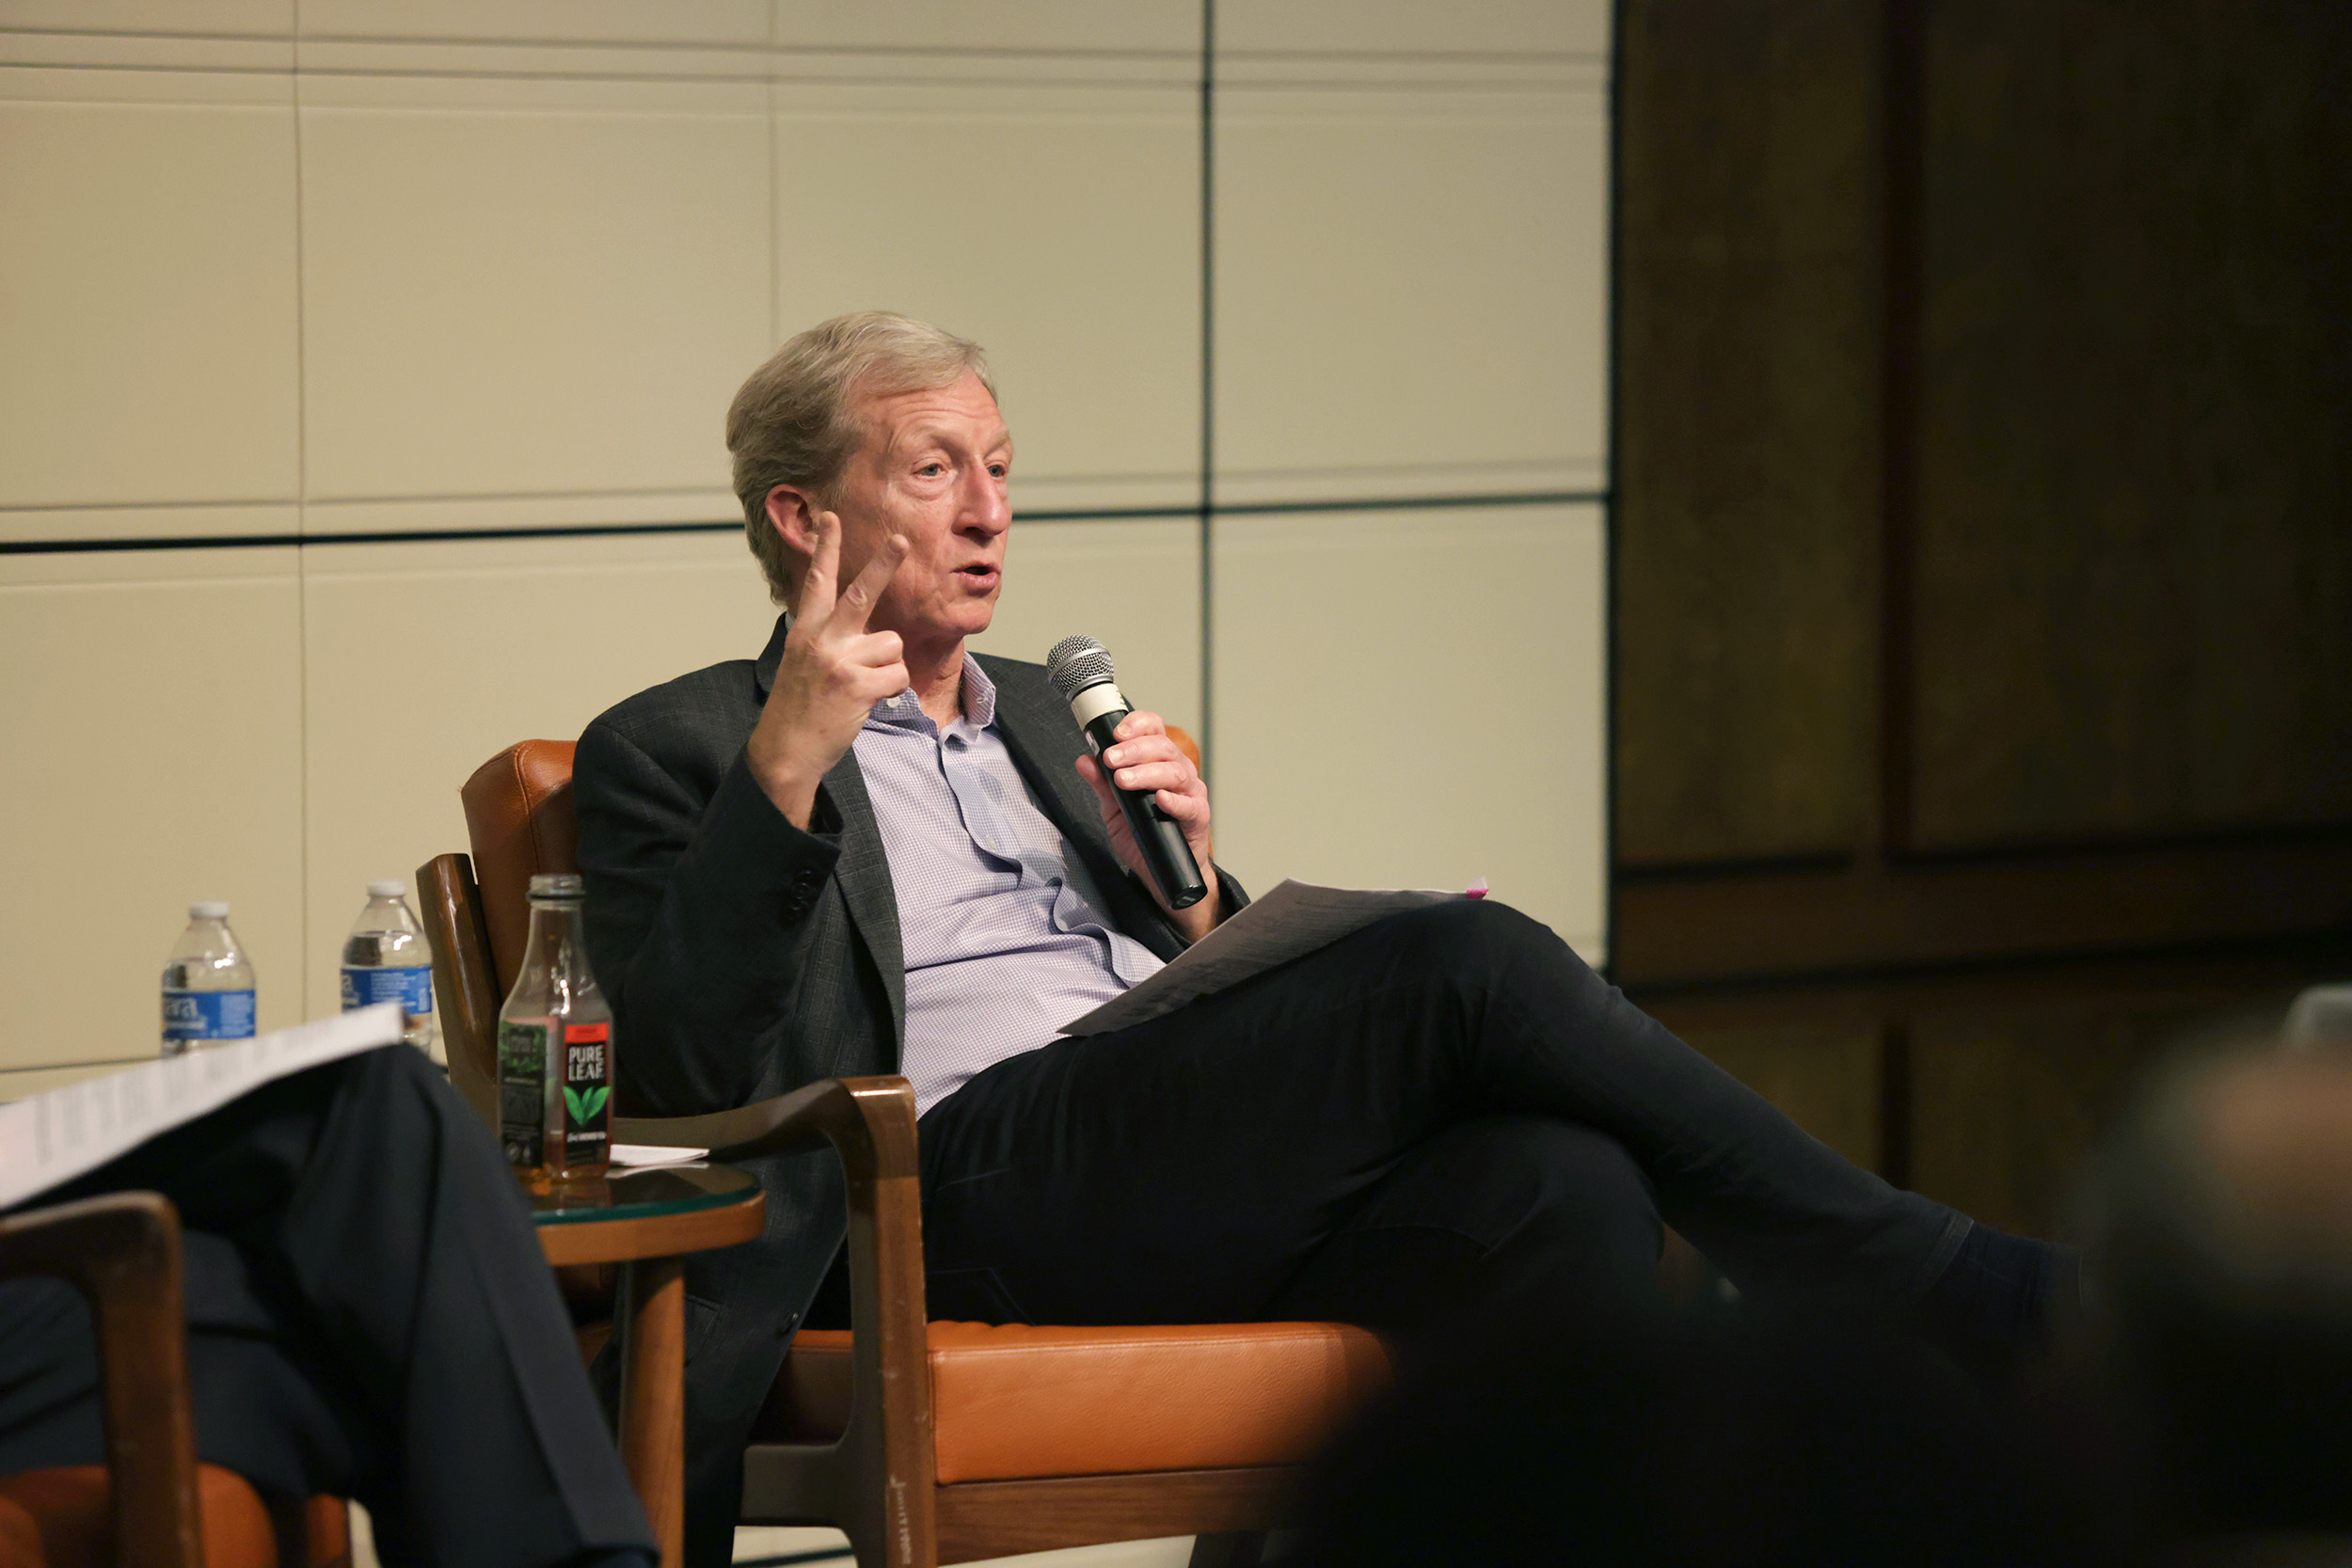 Tom Steyer, hedge fund manager-turned environmental activist speaking at the Ath.